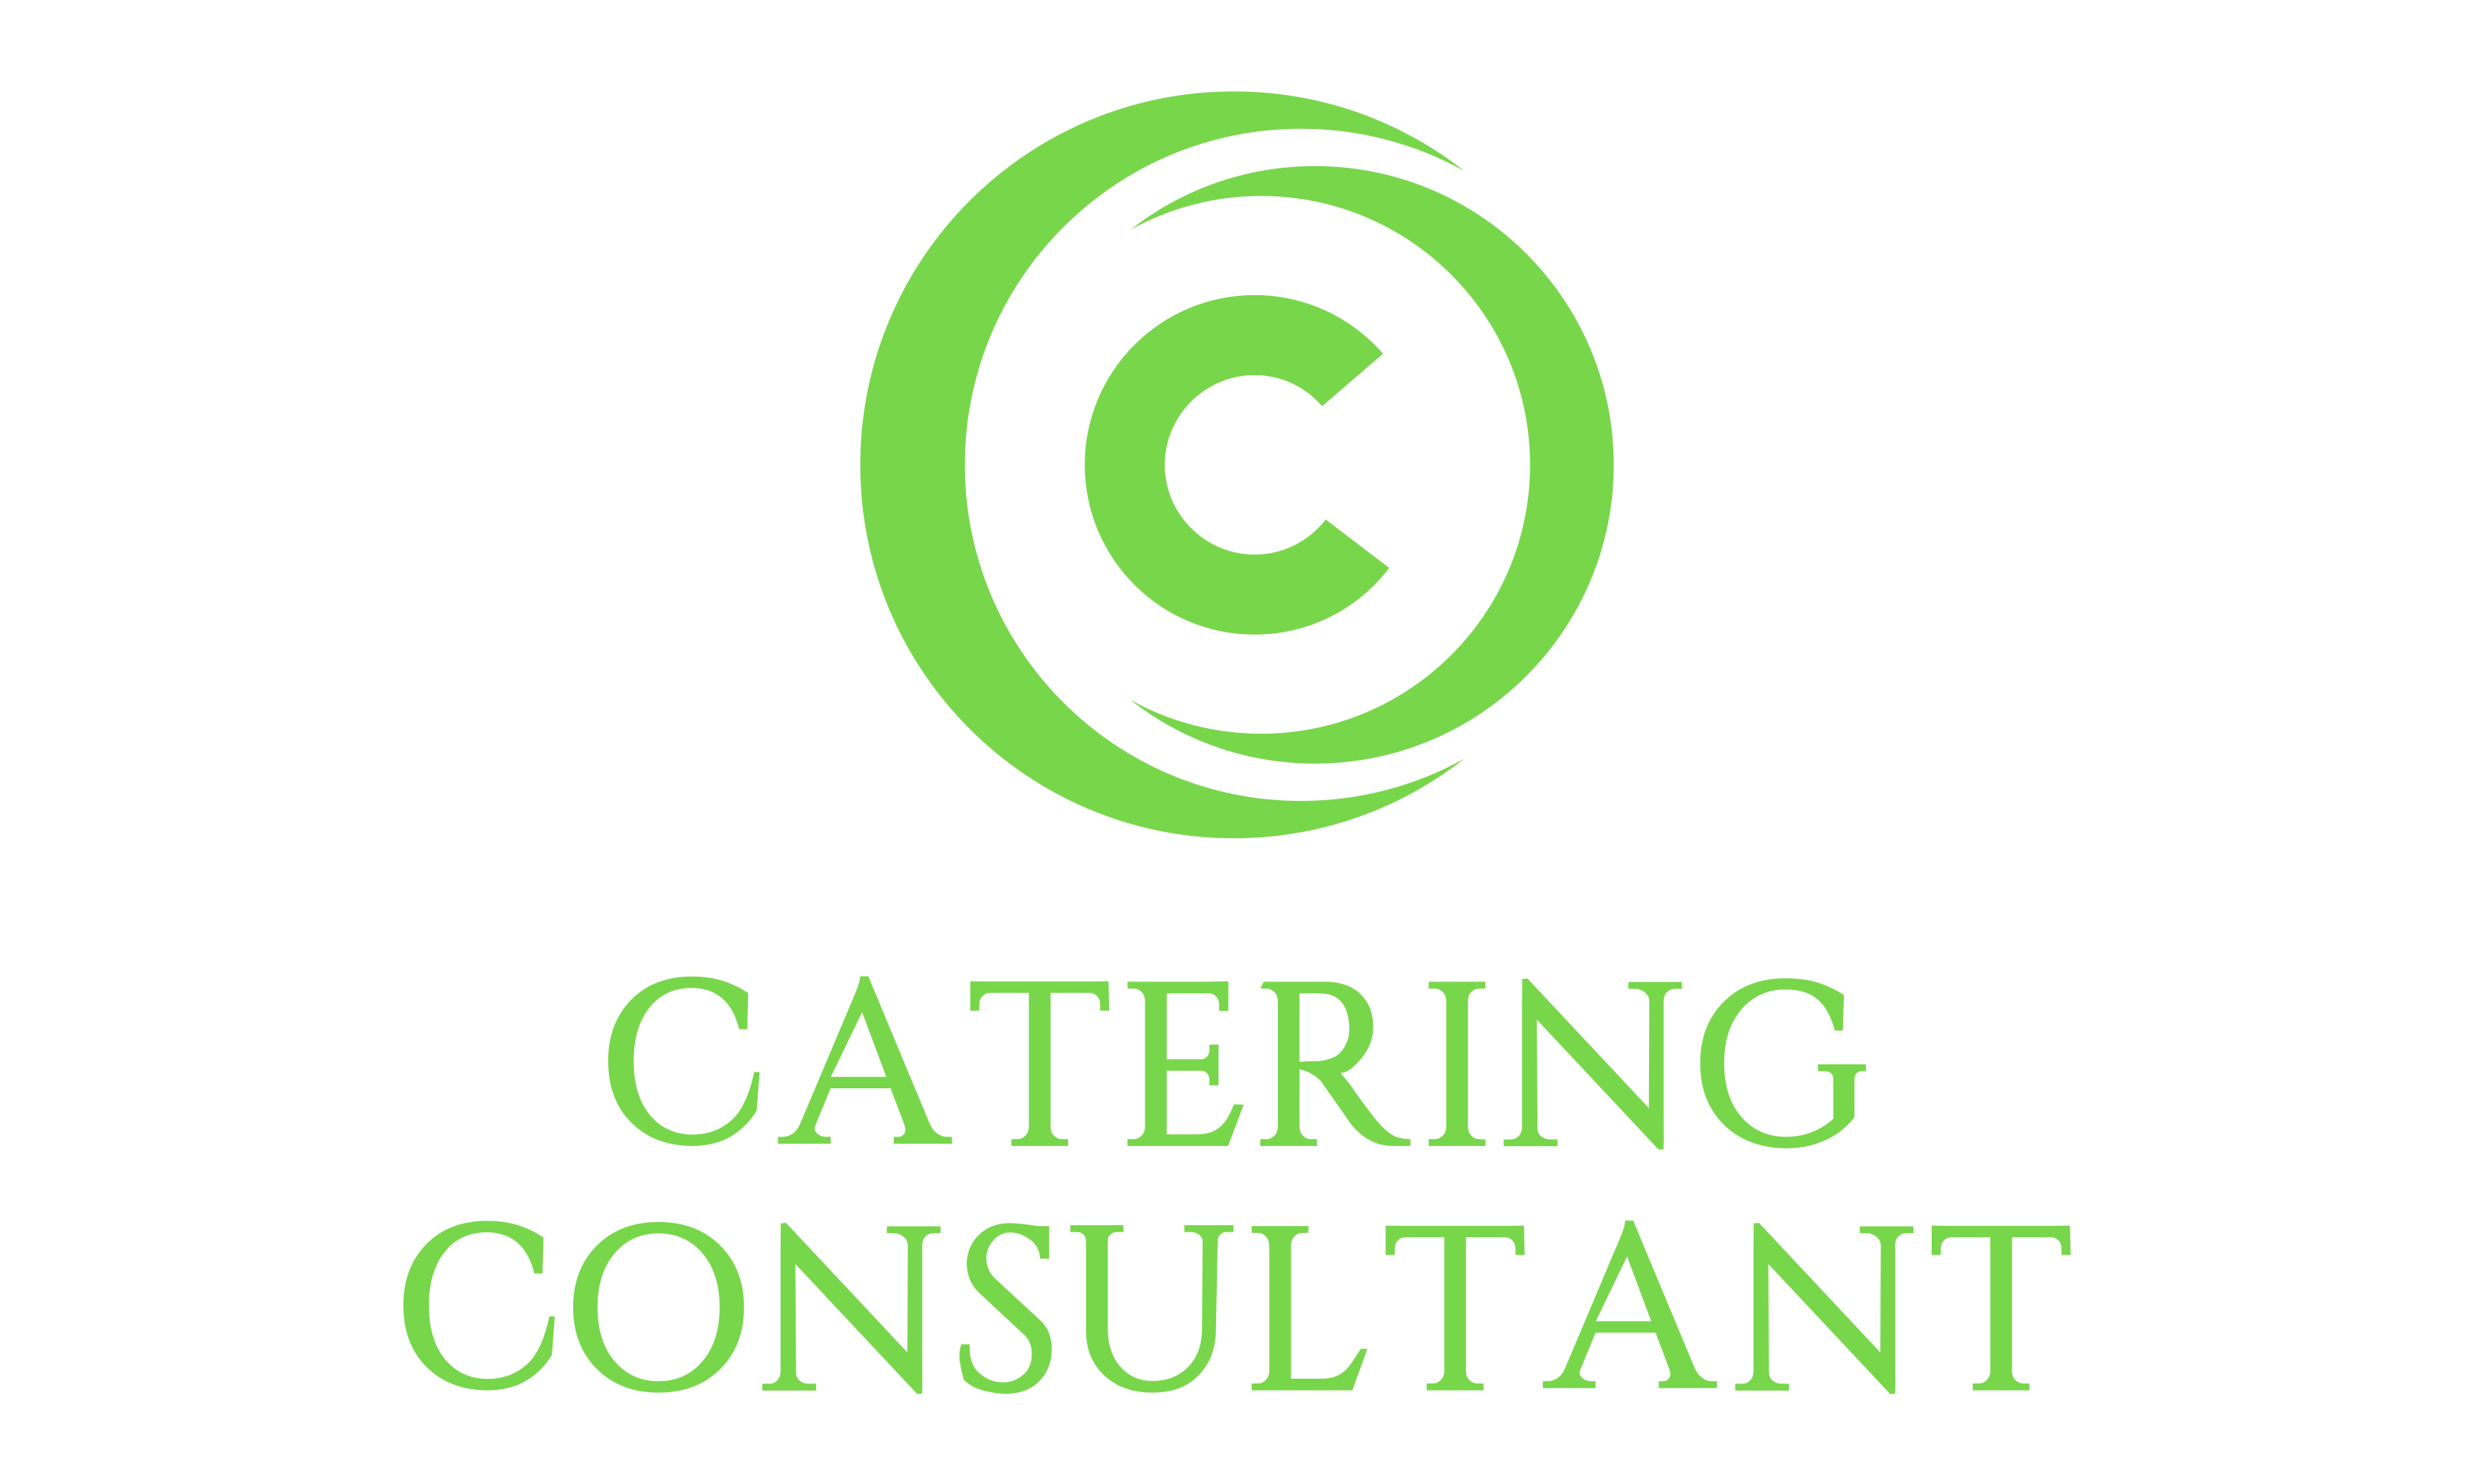 Top 5 New Years Resolutions For Business Success - Catering Consultants